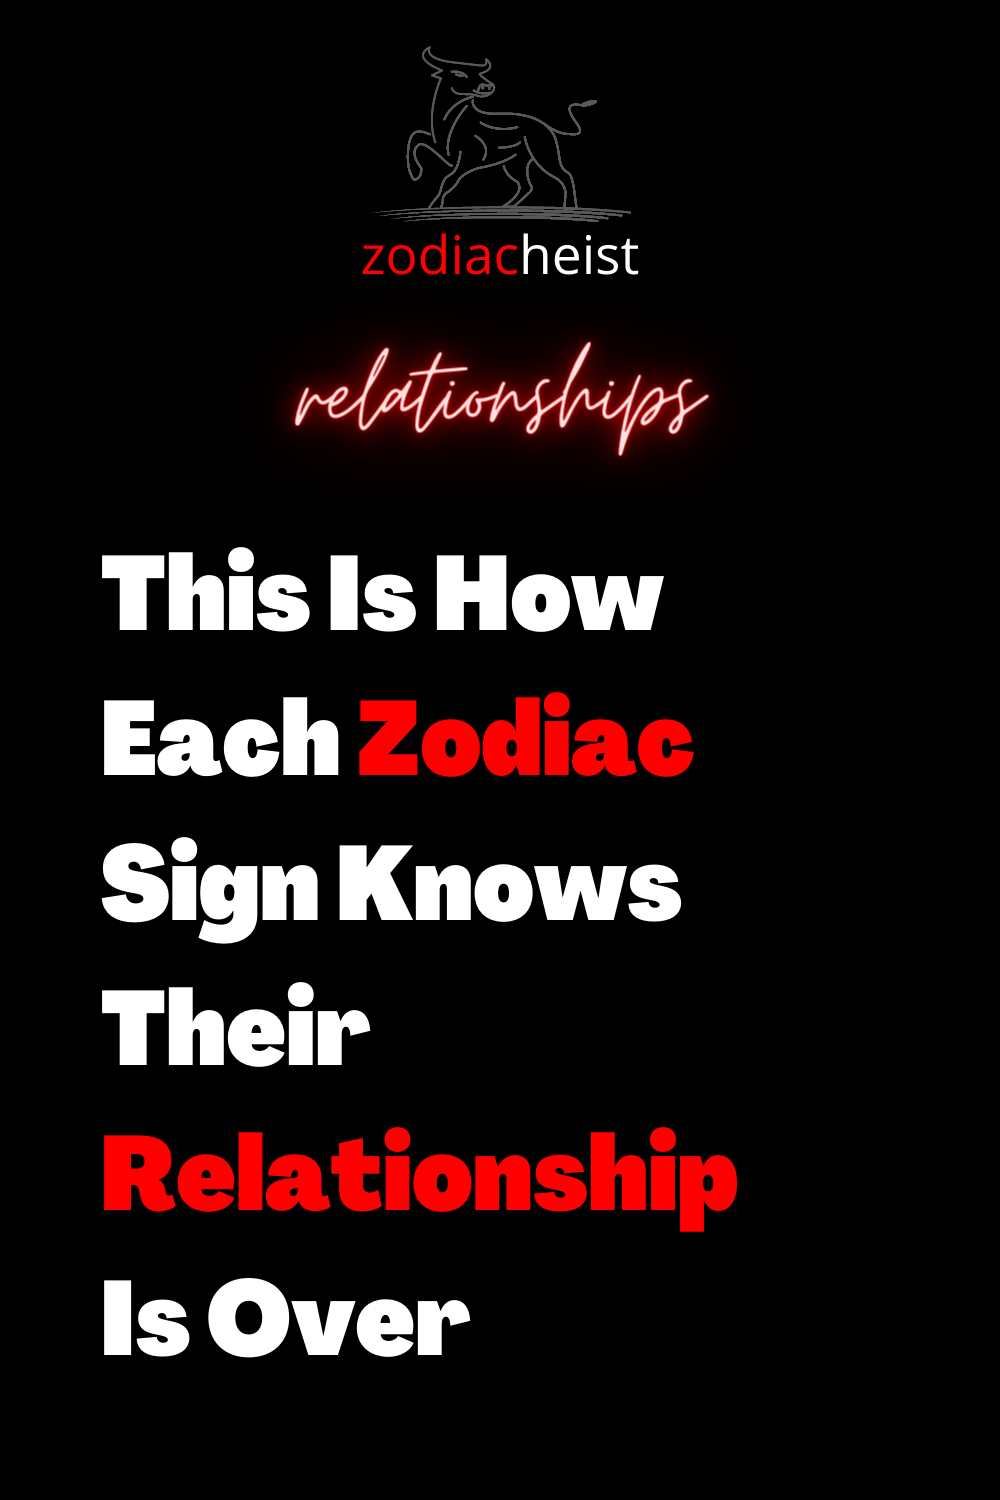 This Is How Each Zodiac Sign Knows Their Relationship Is Over